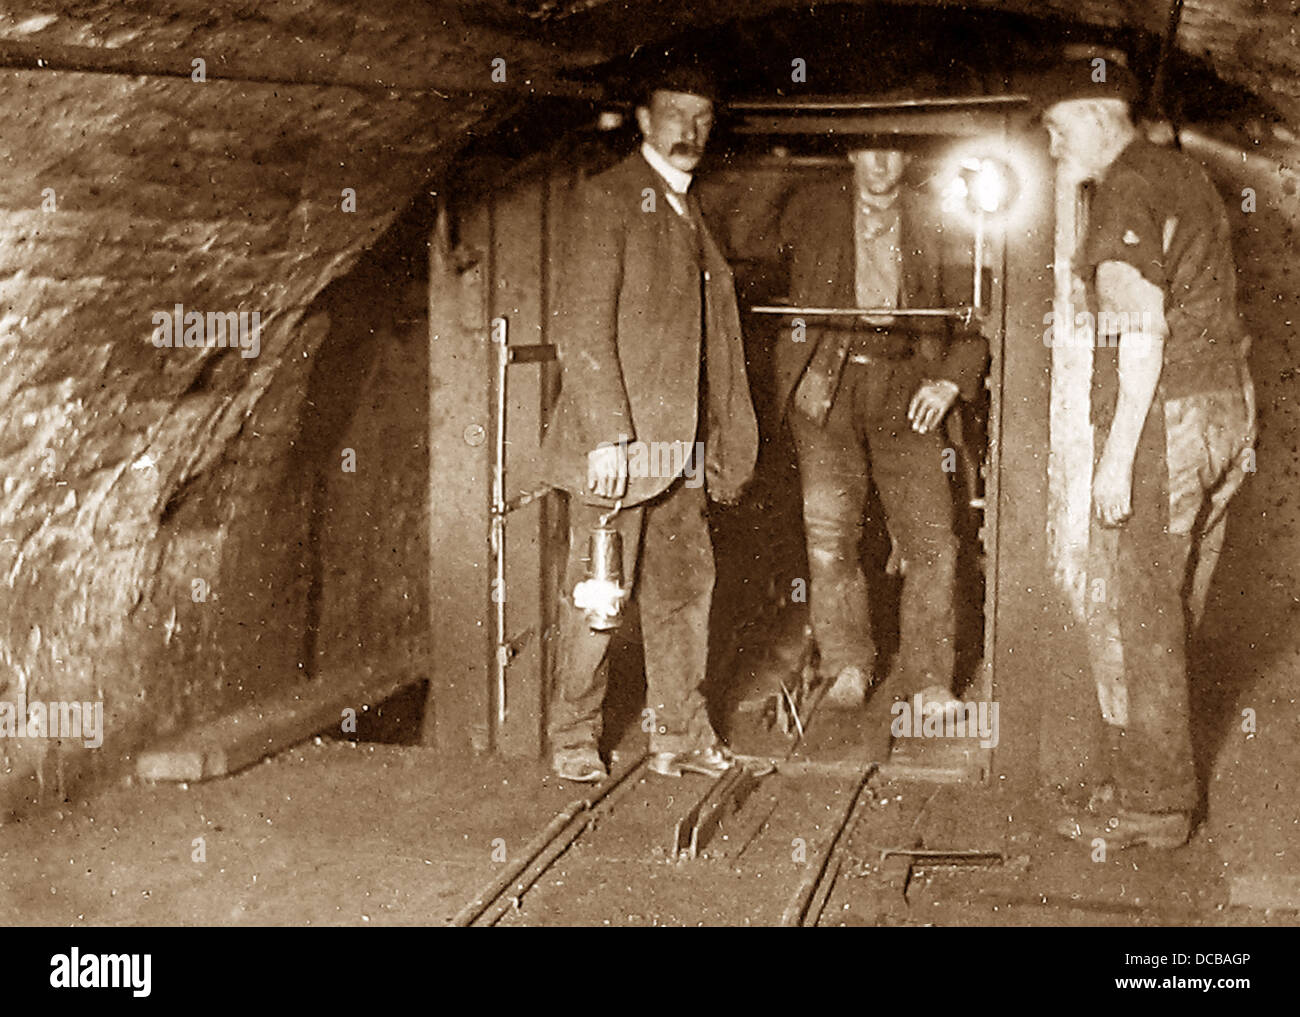 Coal Mining Bottom of the shaft early 1900s Stock Photo